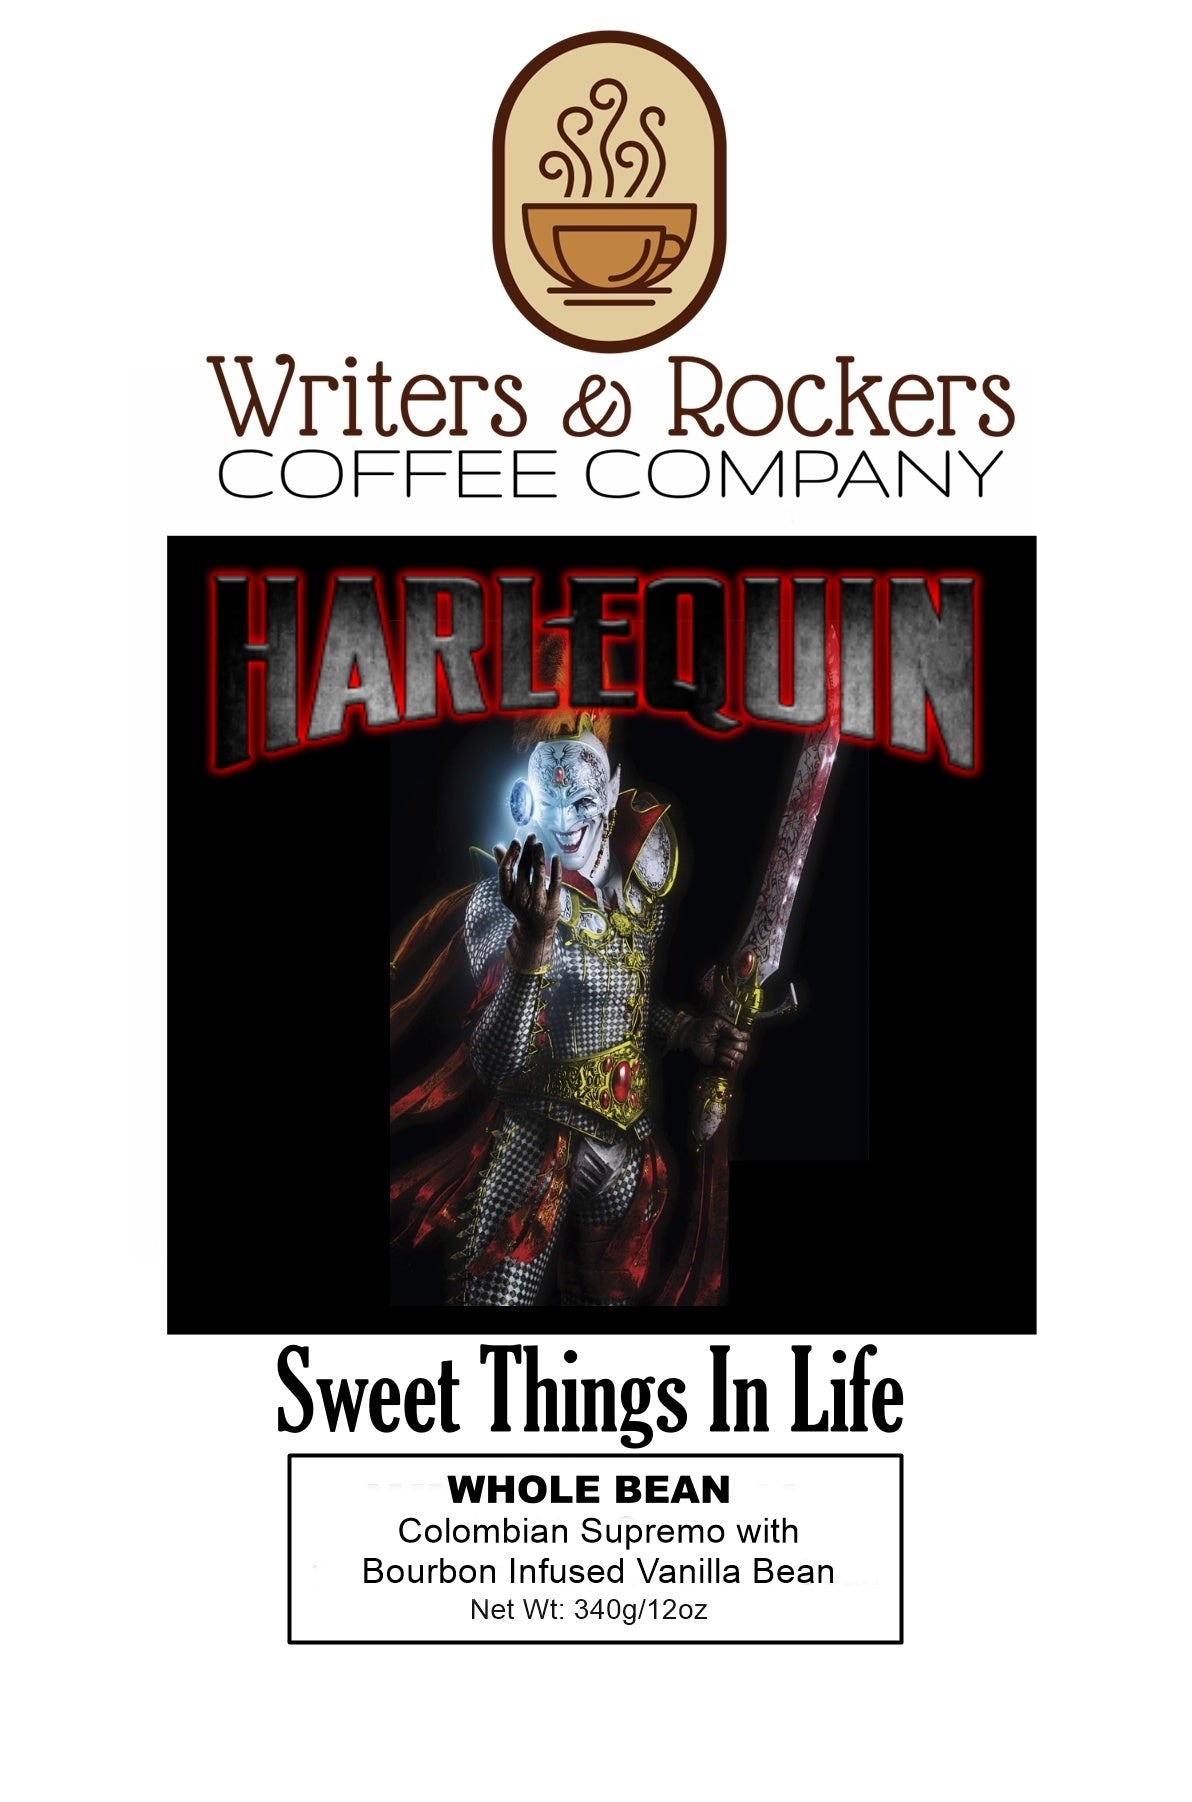 Harlequin's Sweet Things In Life